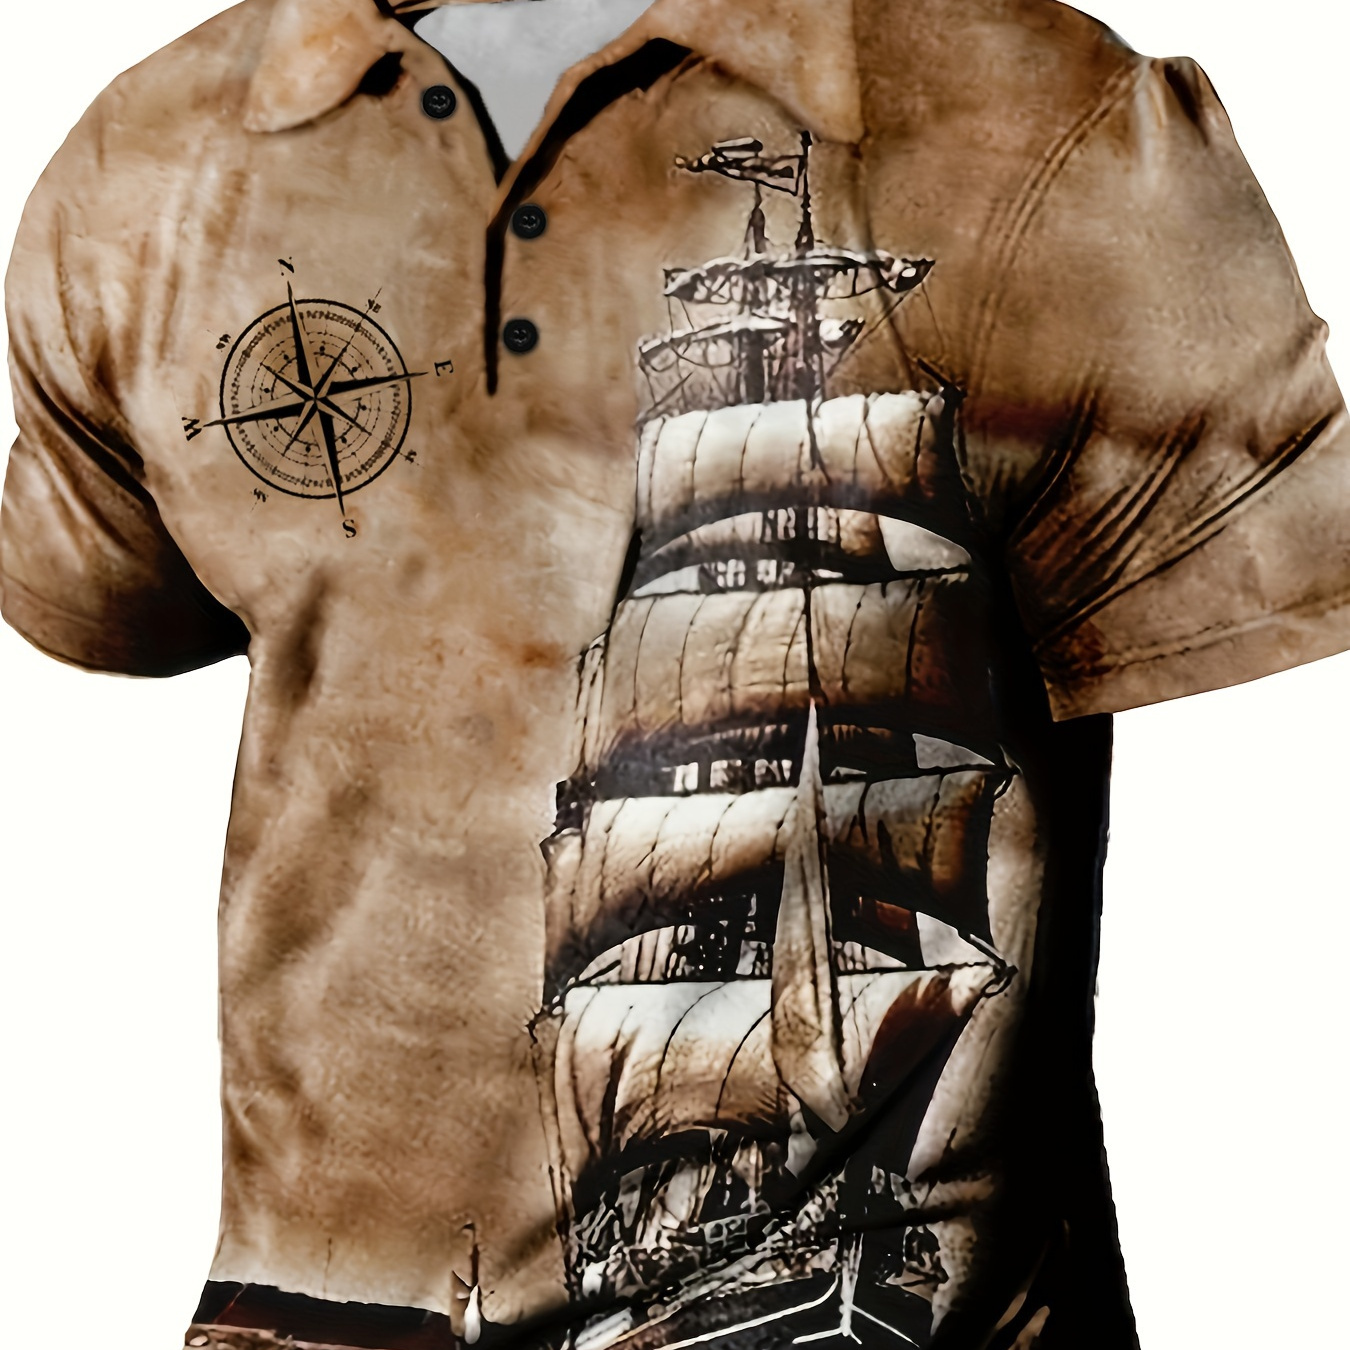 

Men's Vintage Sailing Boat & Compass Pattern Print Short Sleeve Button Up Lapel Shirt For Summer Daily, Men's Tops, Golf Shirts